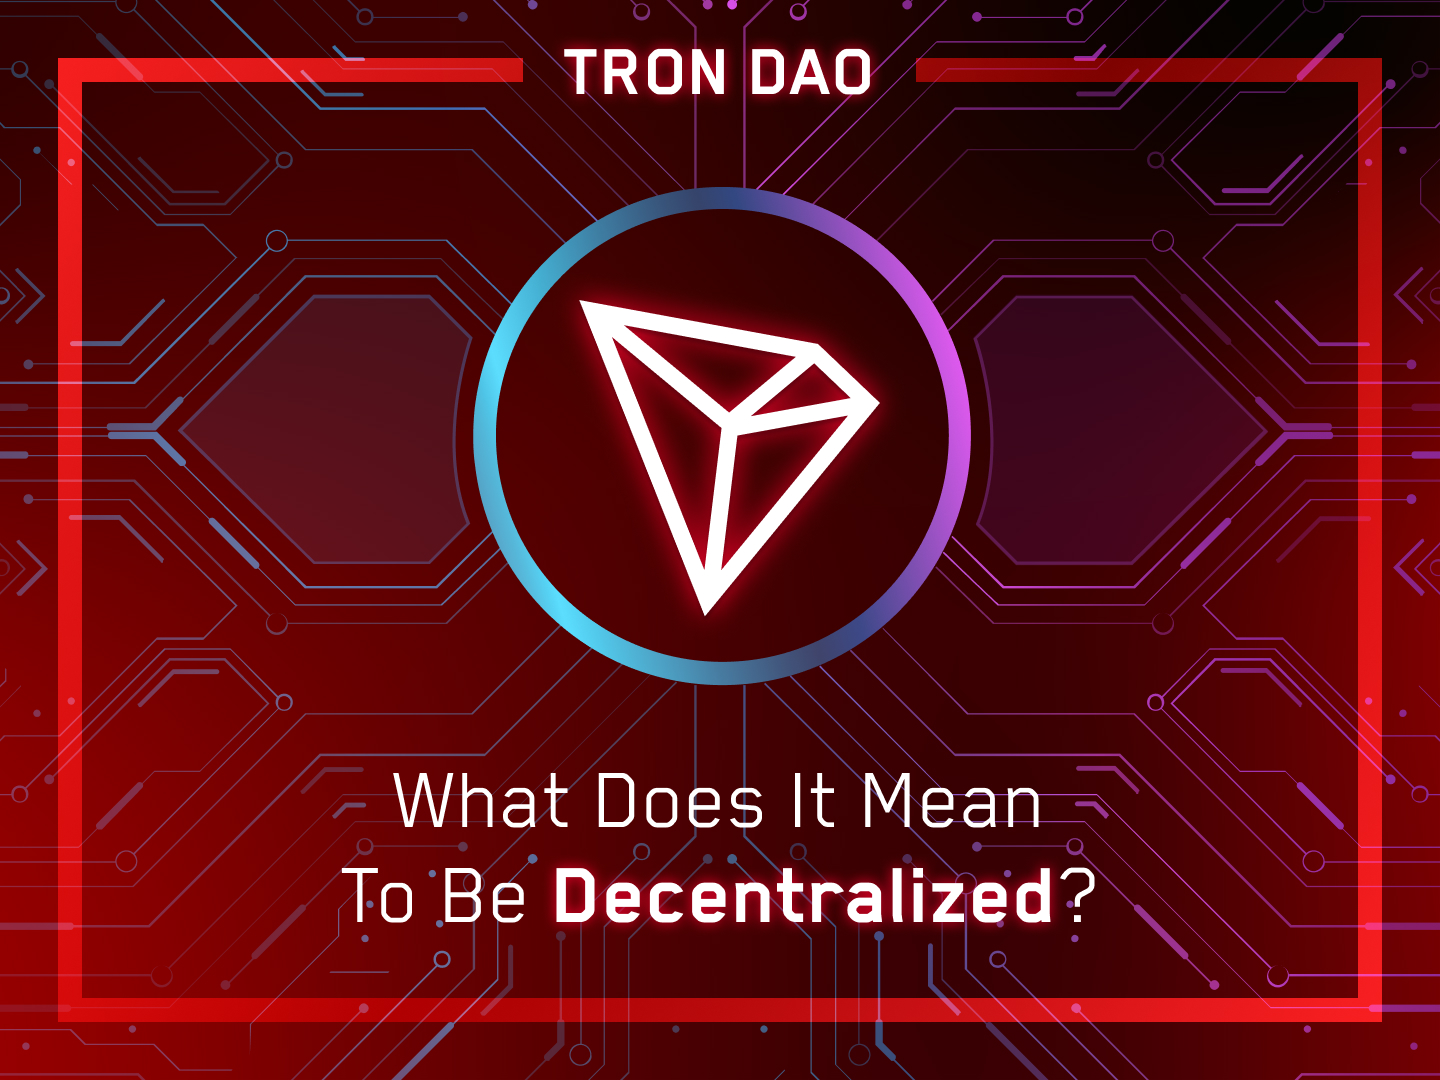 Tron – What Does It Mean to Be Decentralized